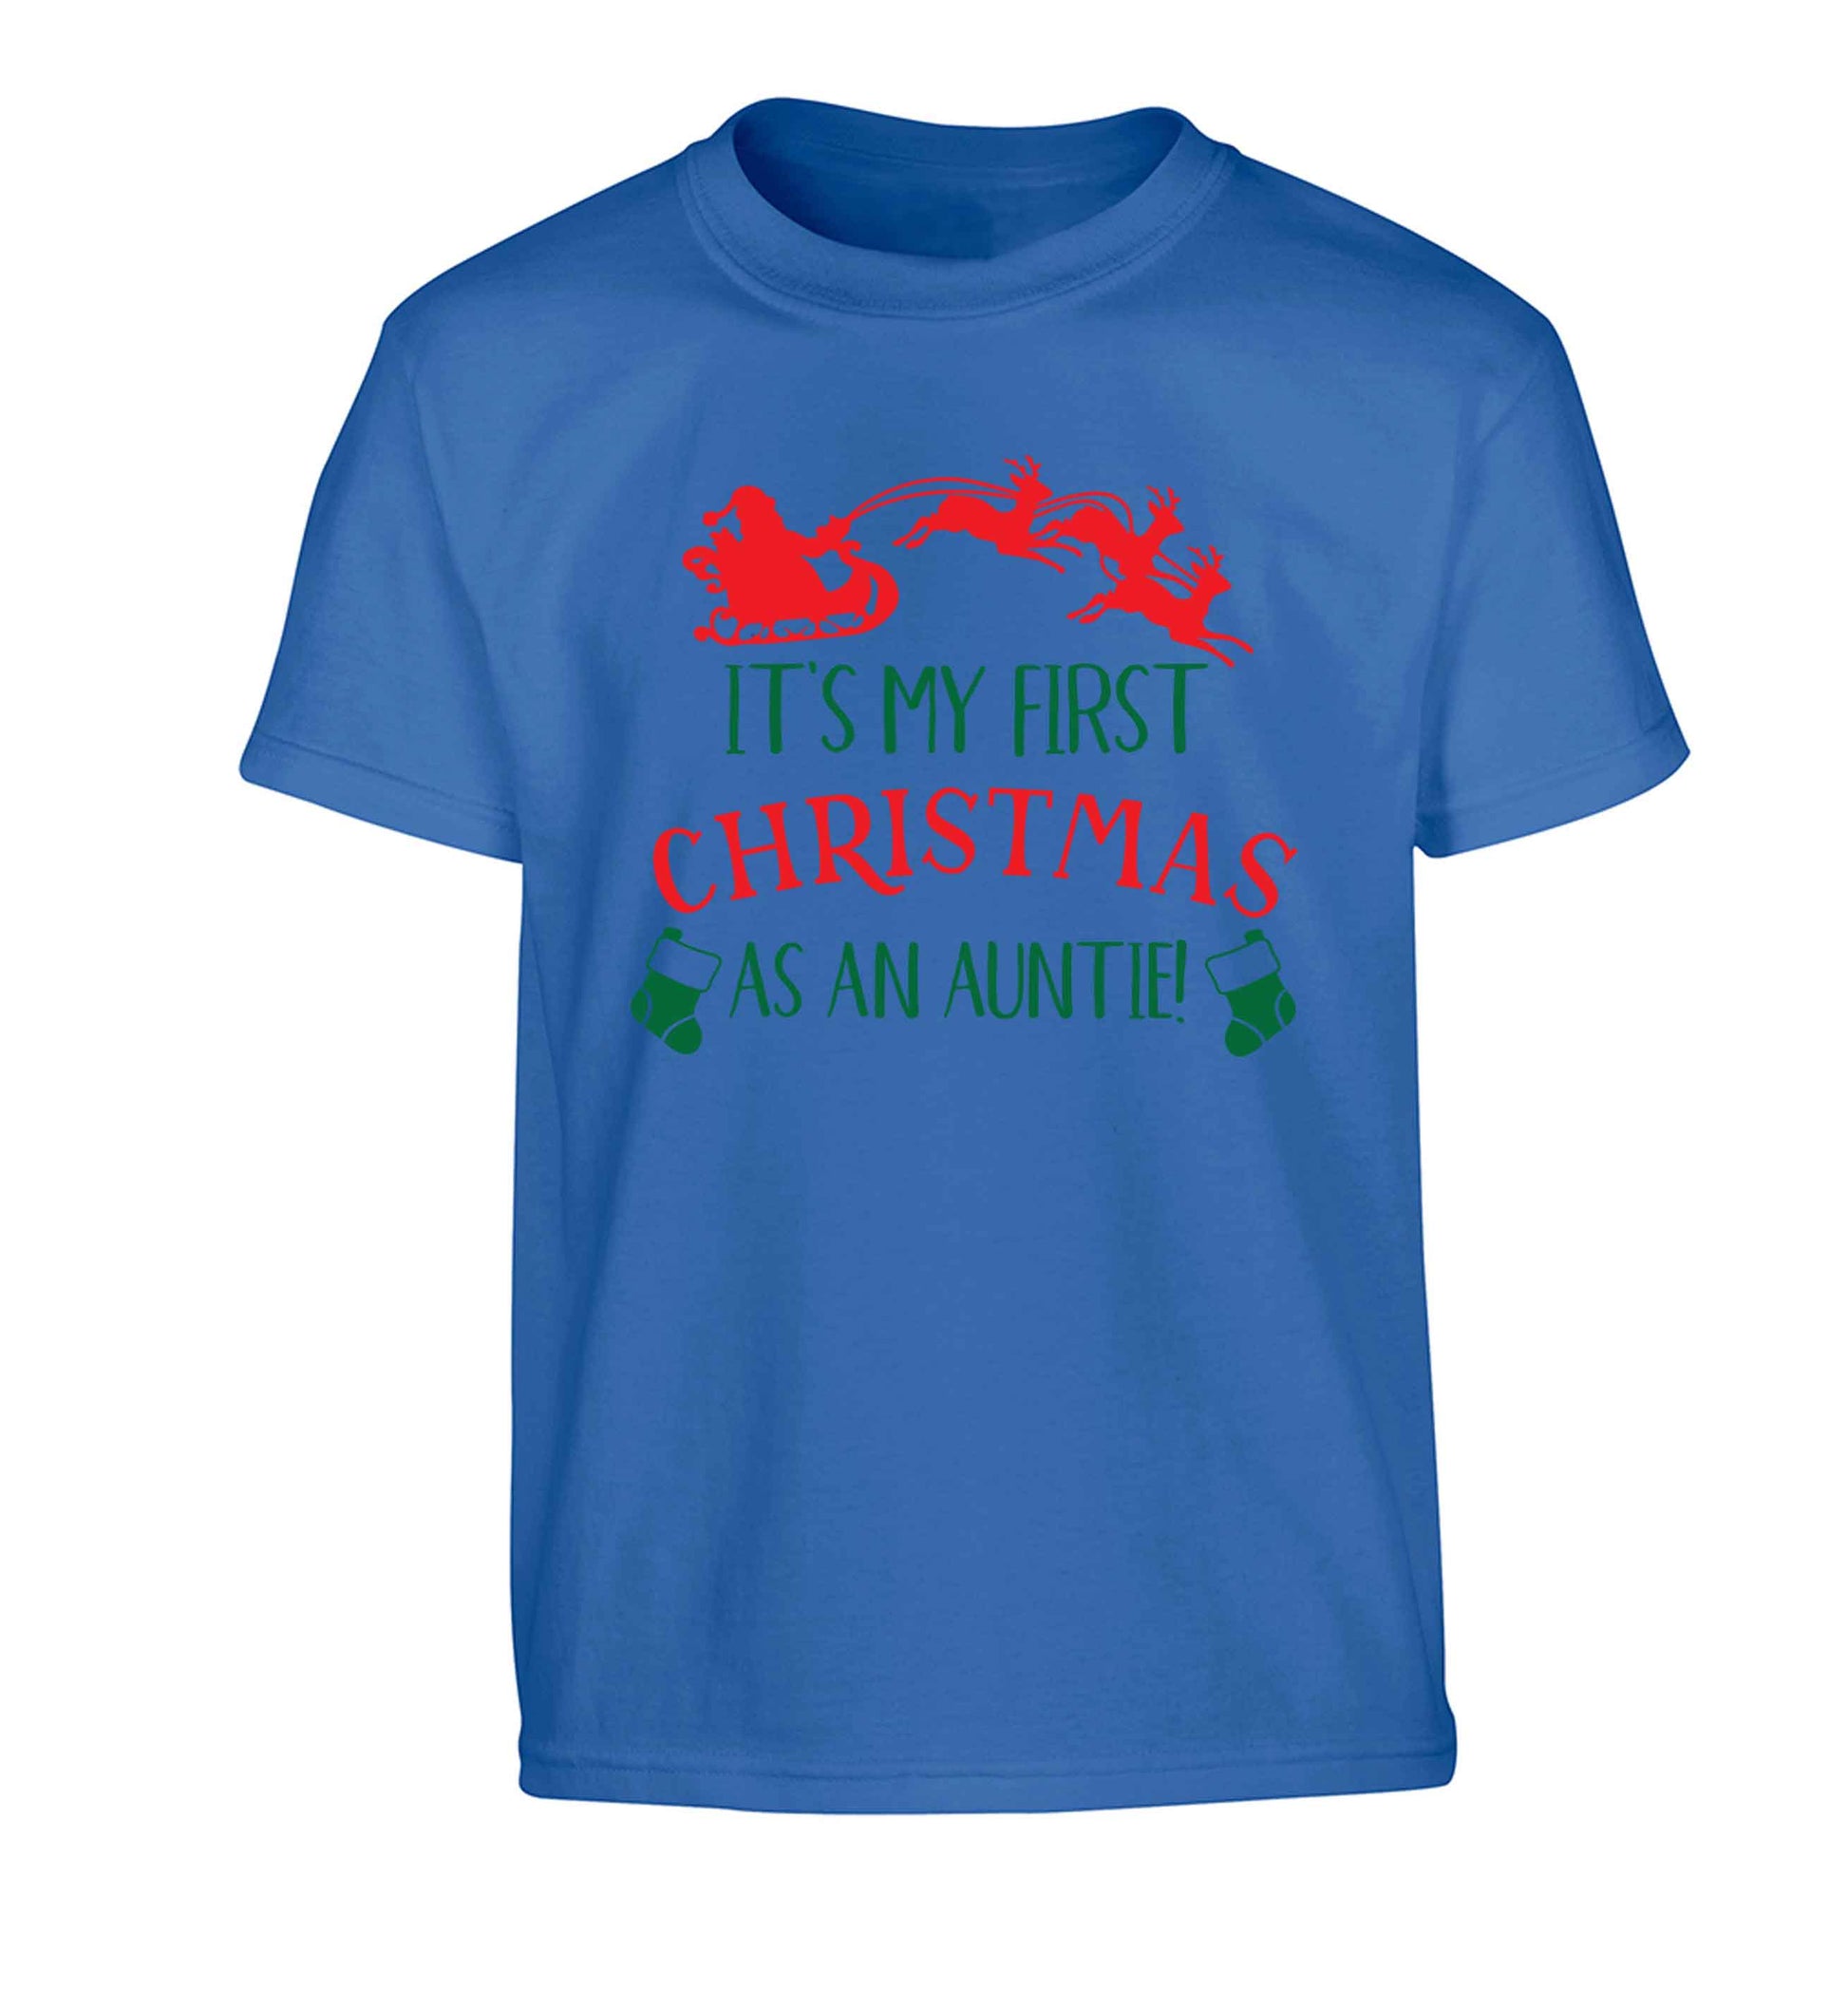 It's my first Christmas as an auntie! Children's blue Tshirt 12-13 Years